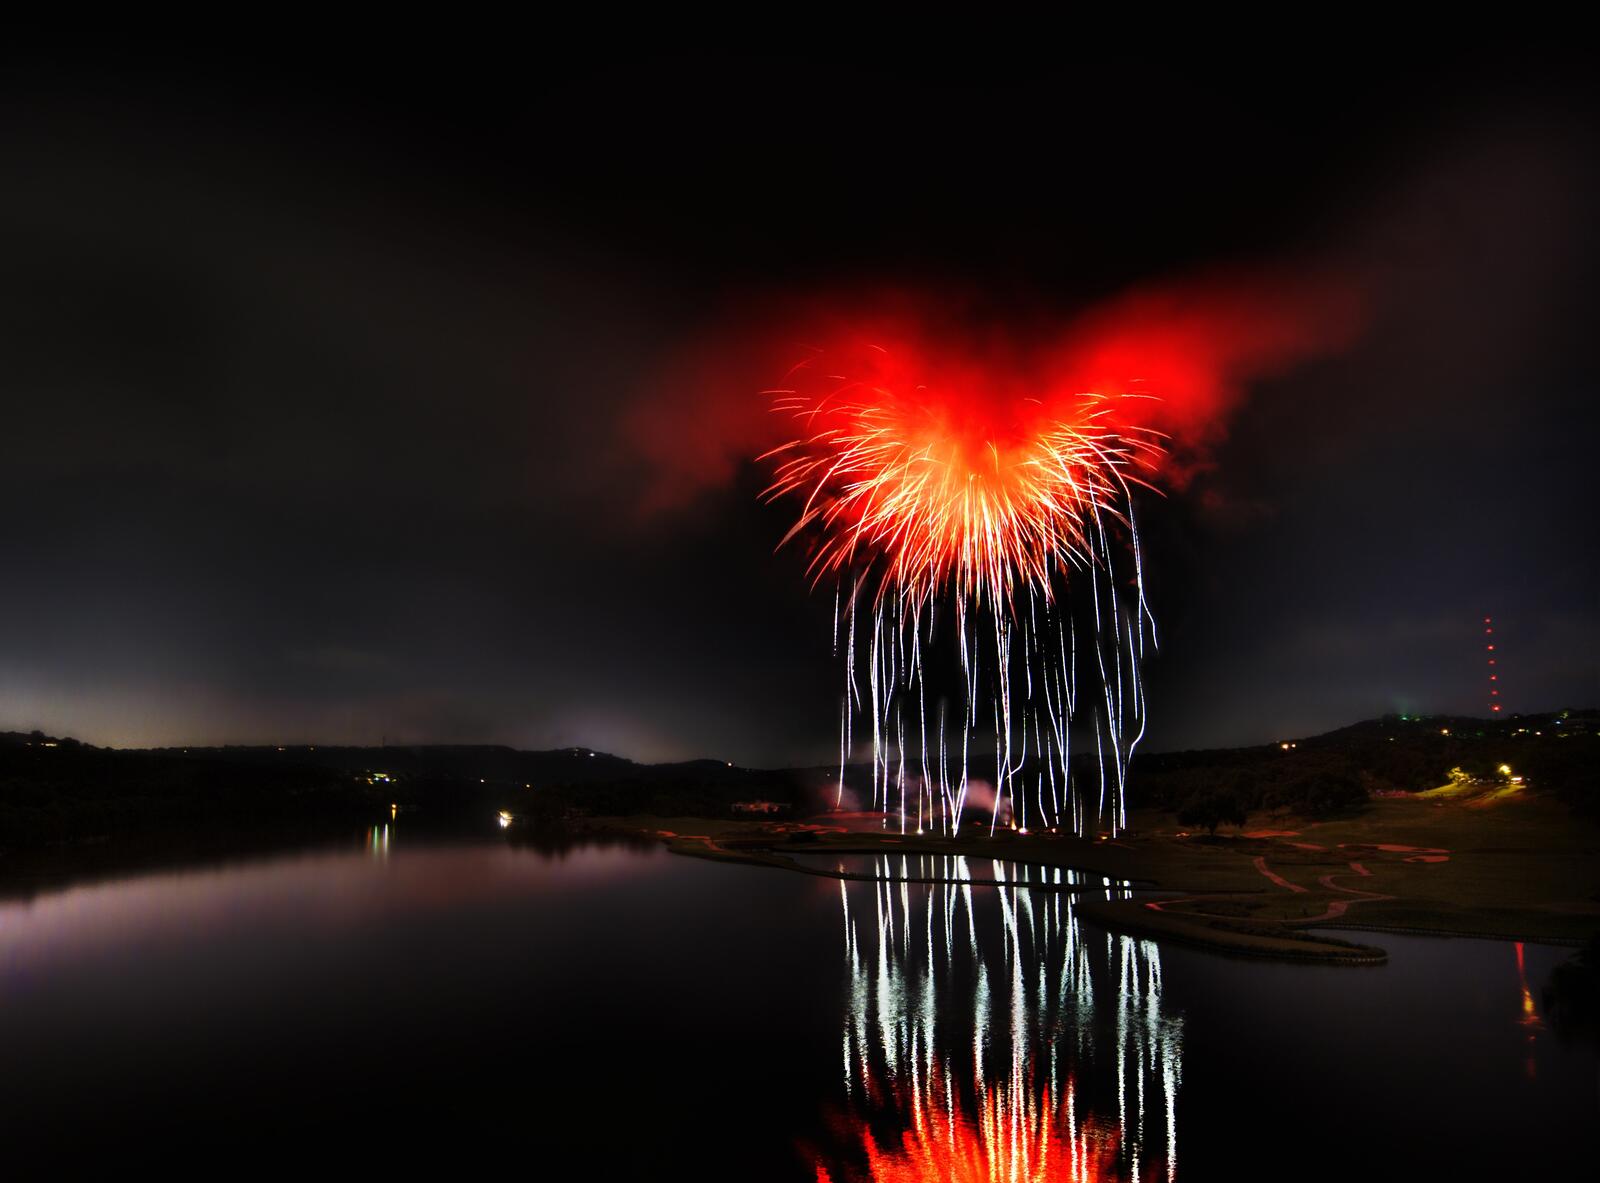 Free photo An unusual celestial explosion near the river in the darkness